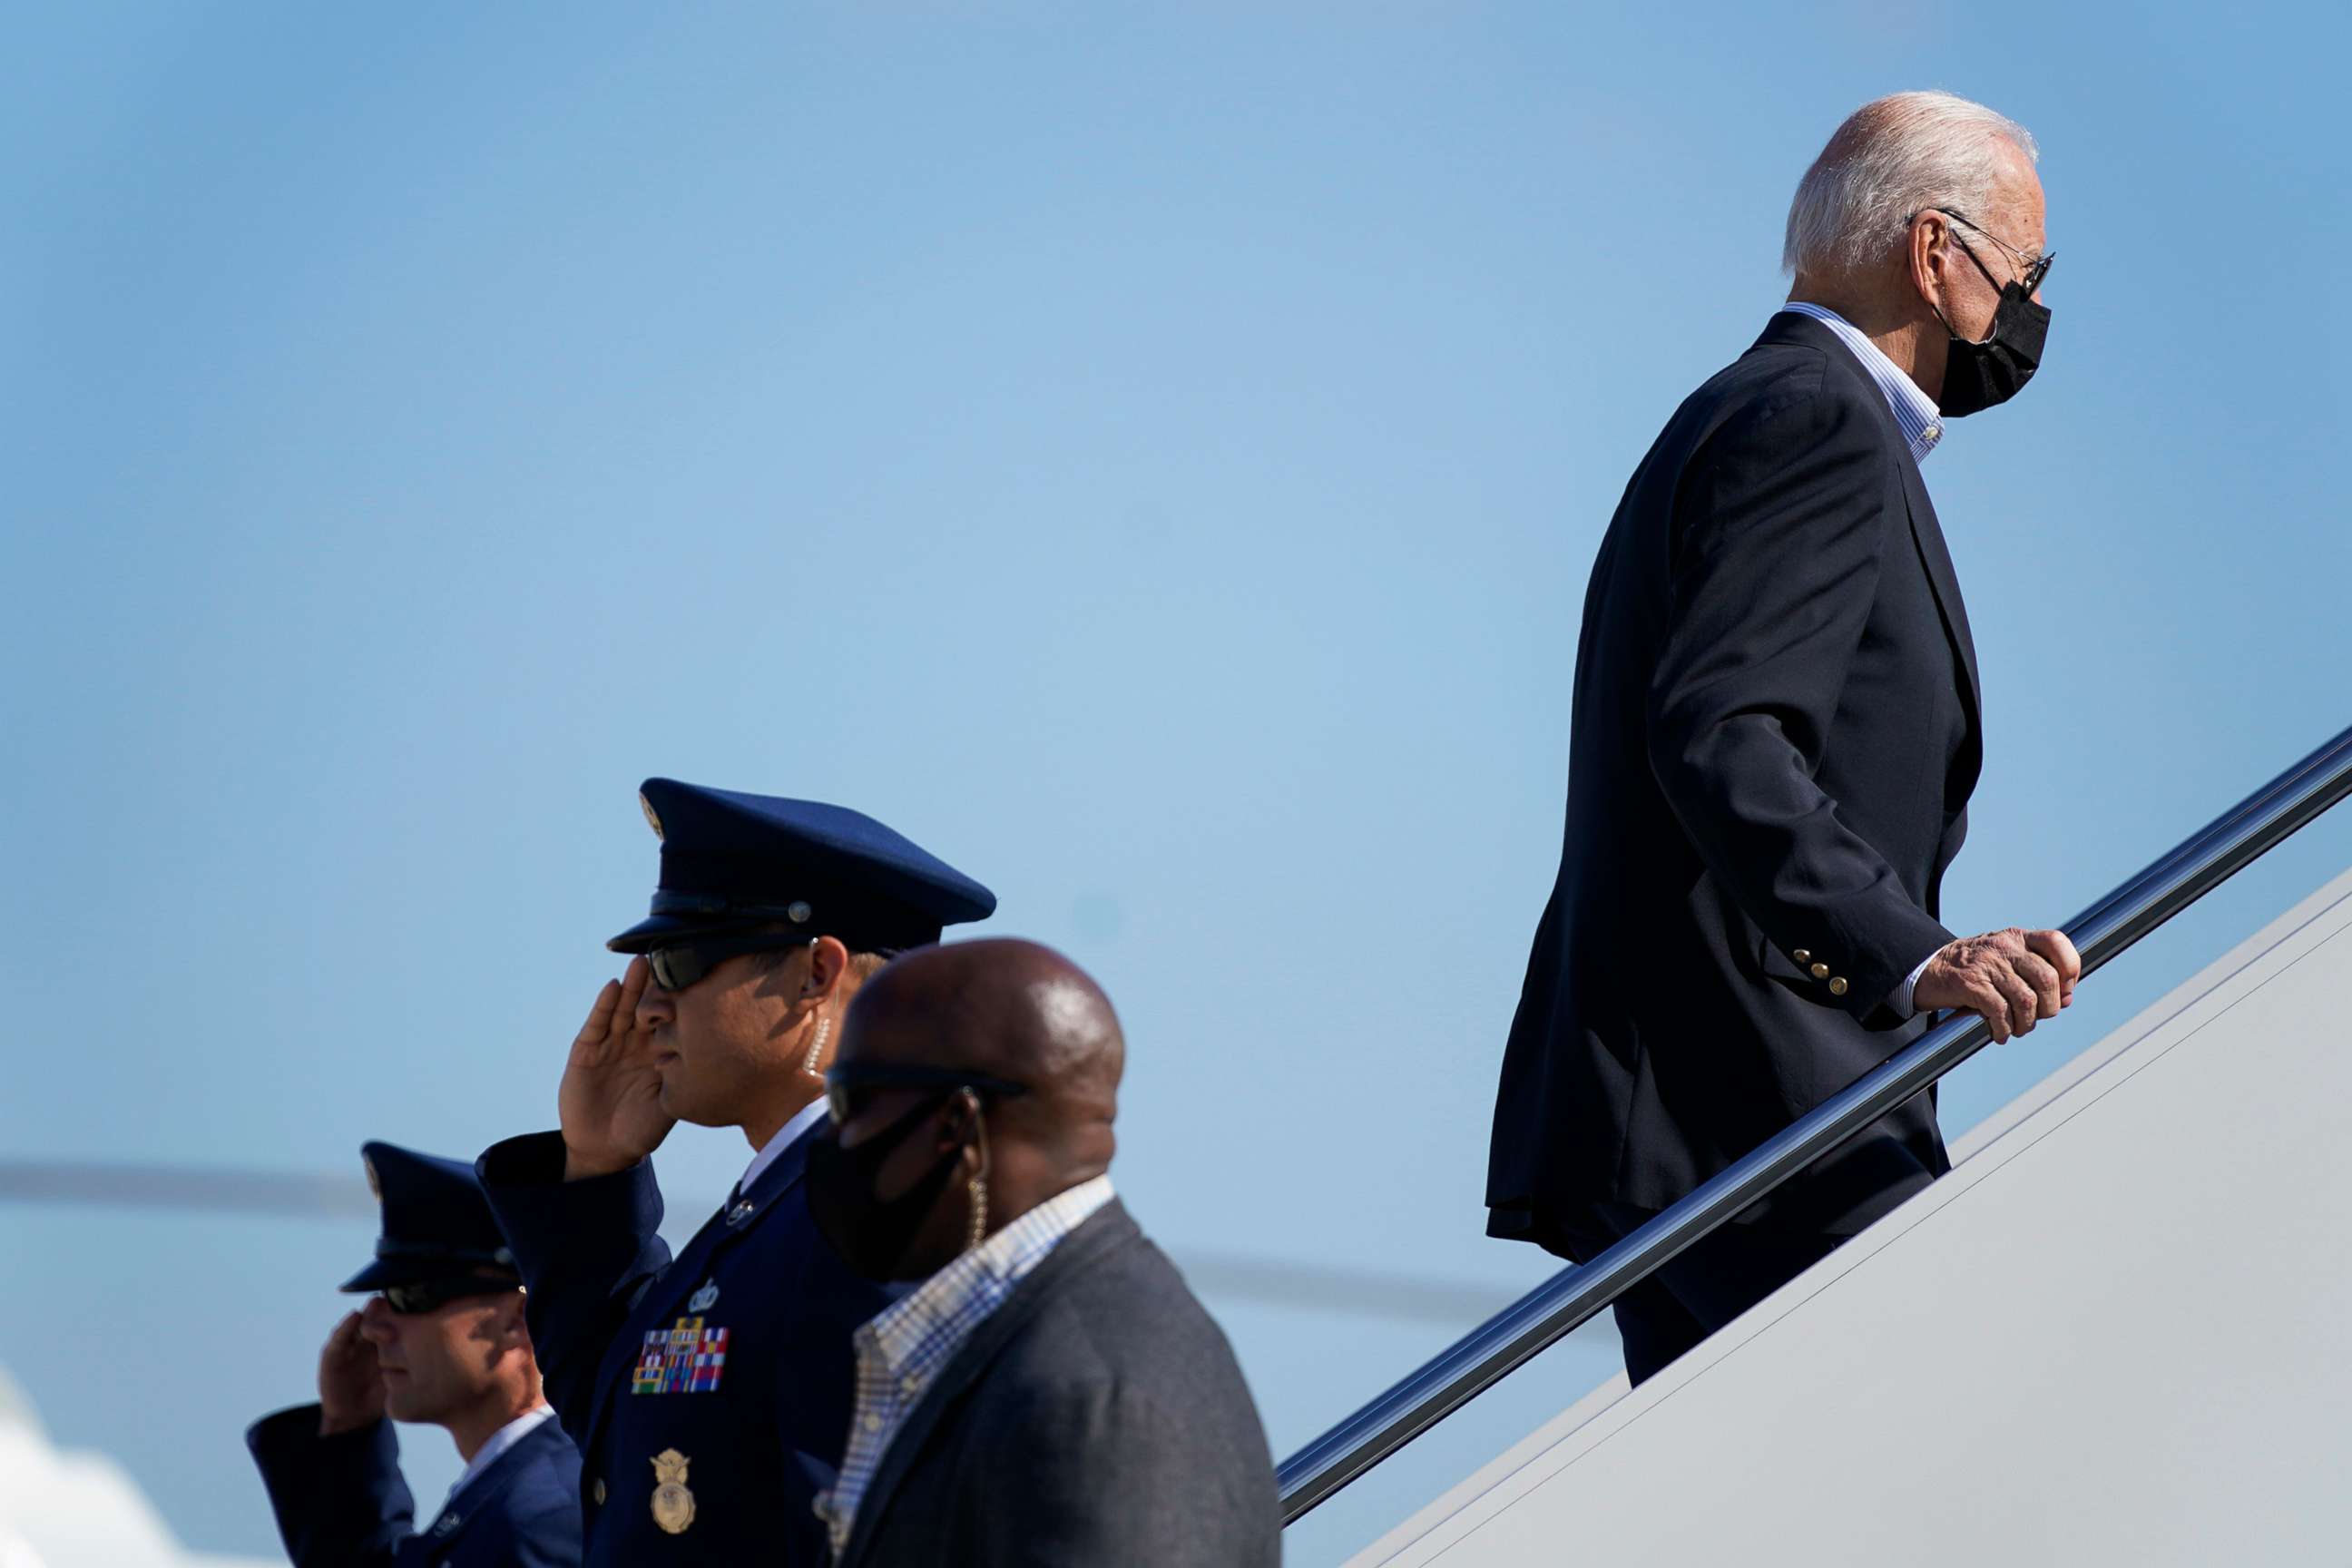 PHOTO: President Joe Biden boards Air Force One for a trip to tour areas affected by Hurricane Ida in New Jersey and New York, Sept. 7, 2021, at Andrews Air Force Base, Md.